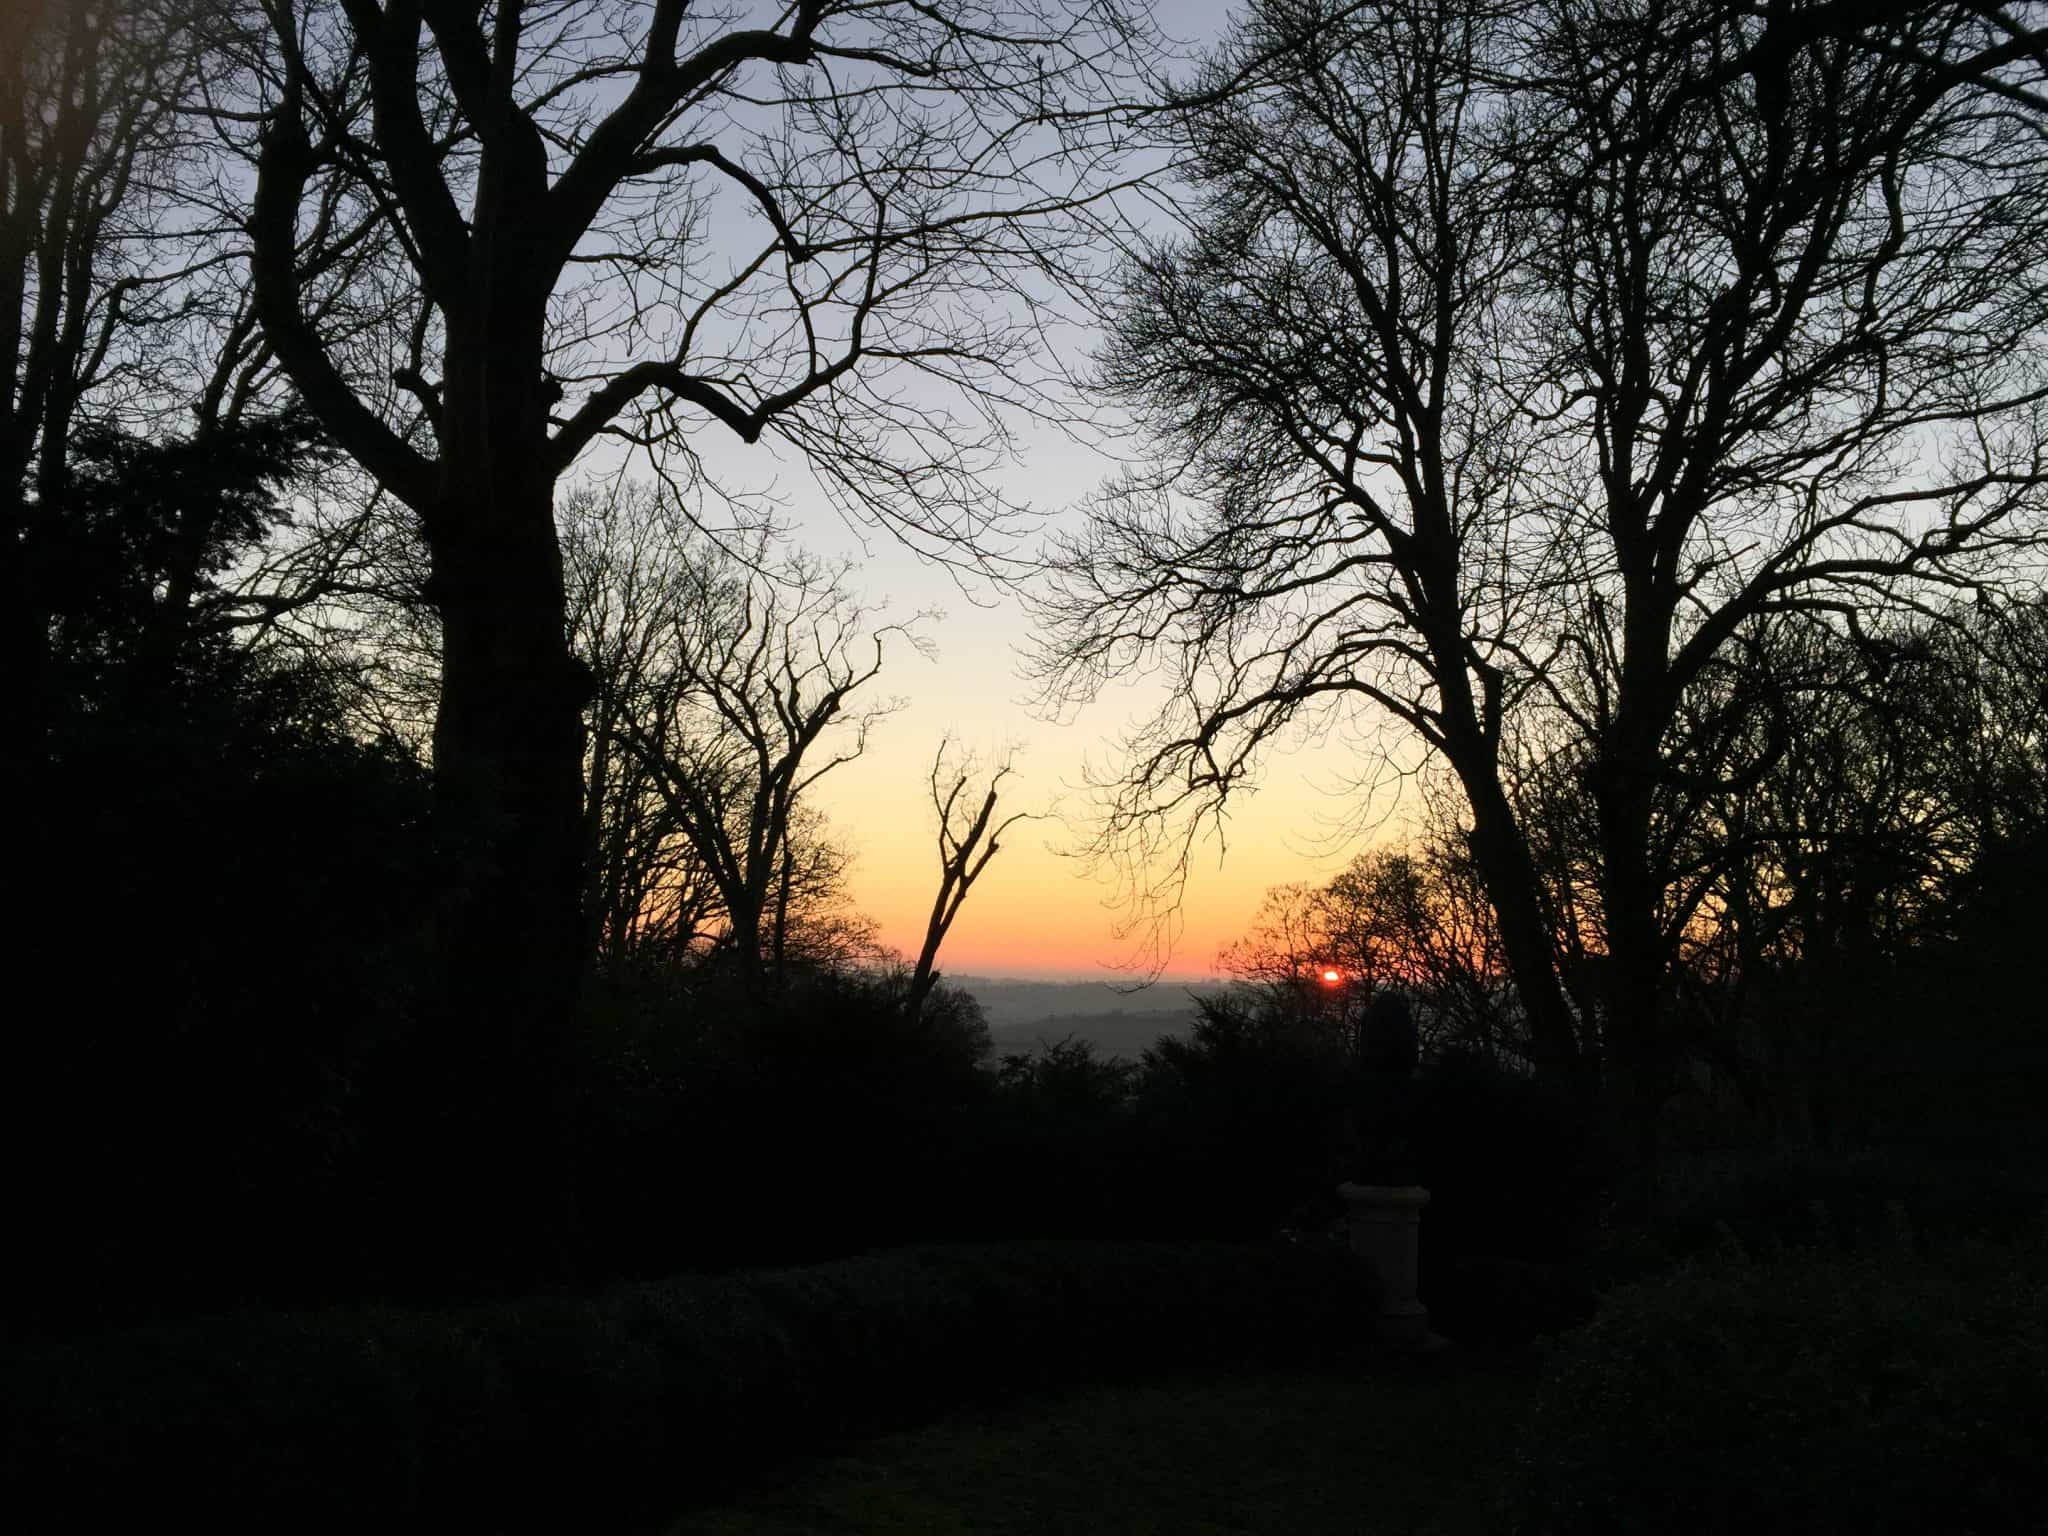 The view from Waddesdon Manor at sunset